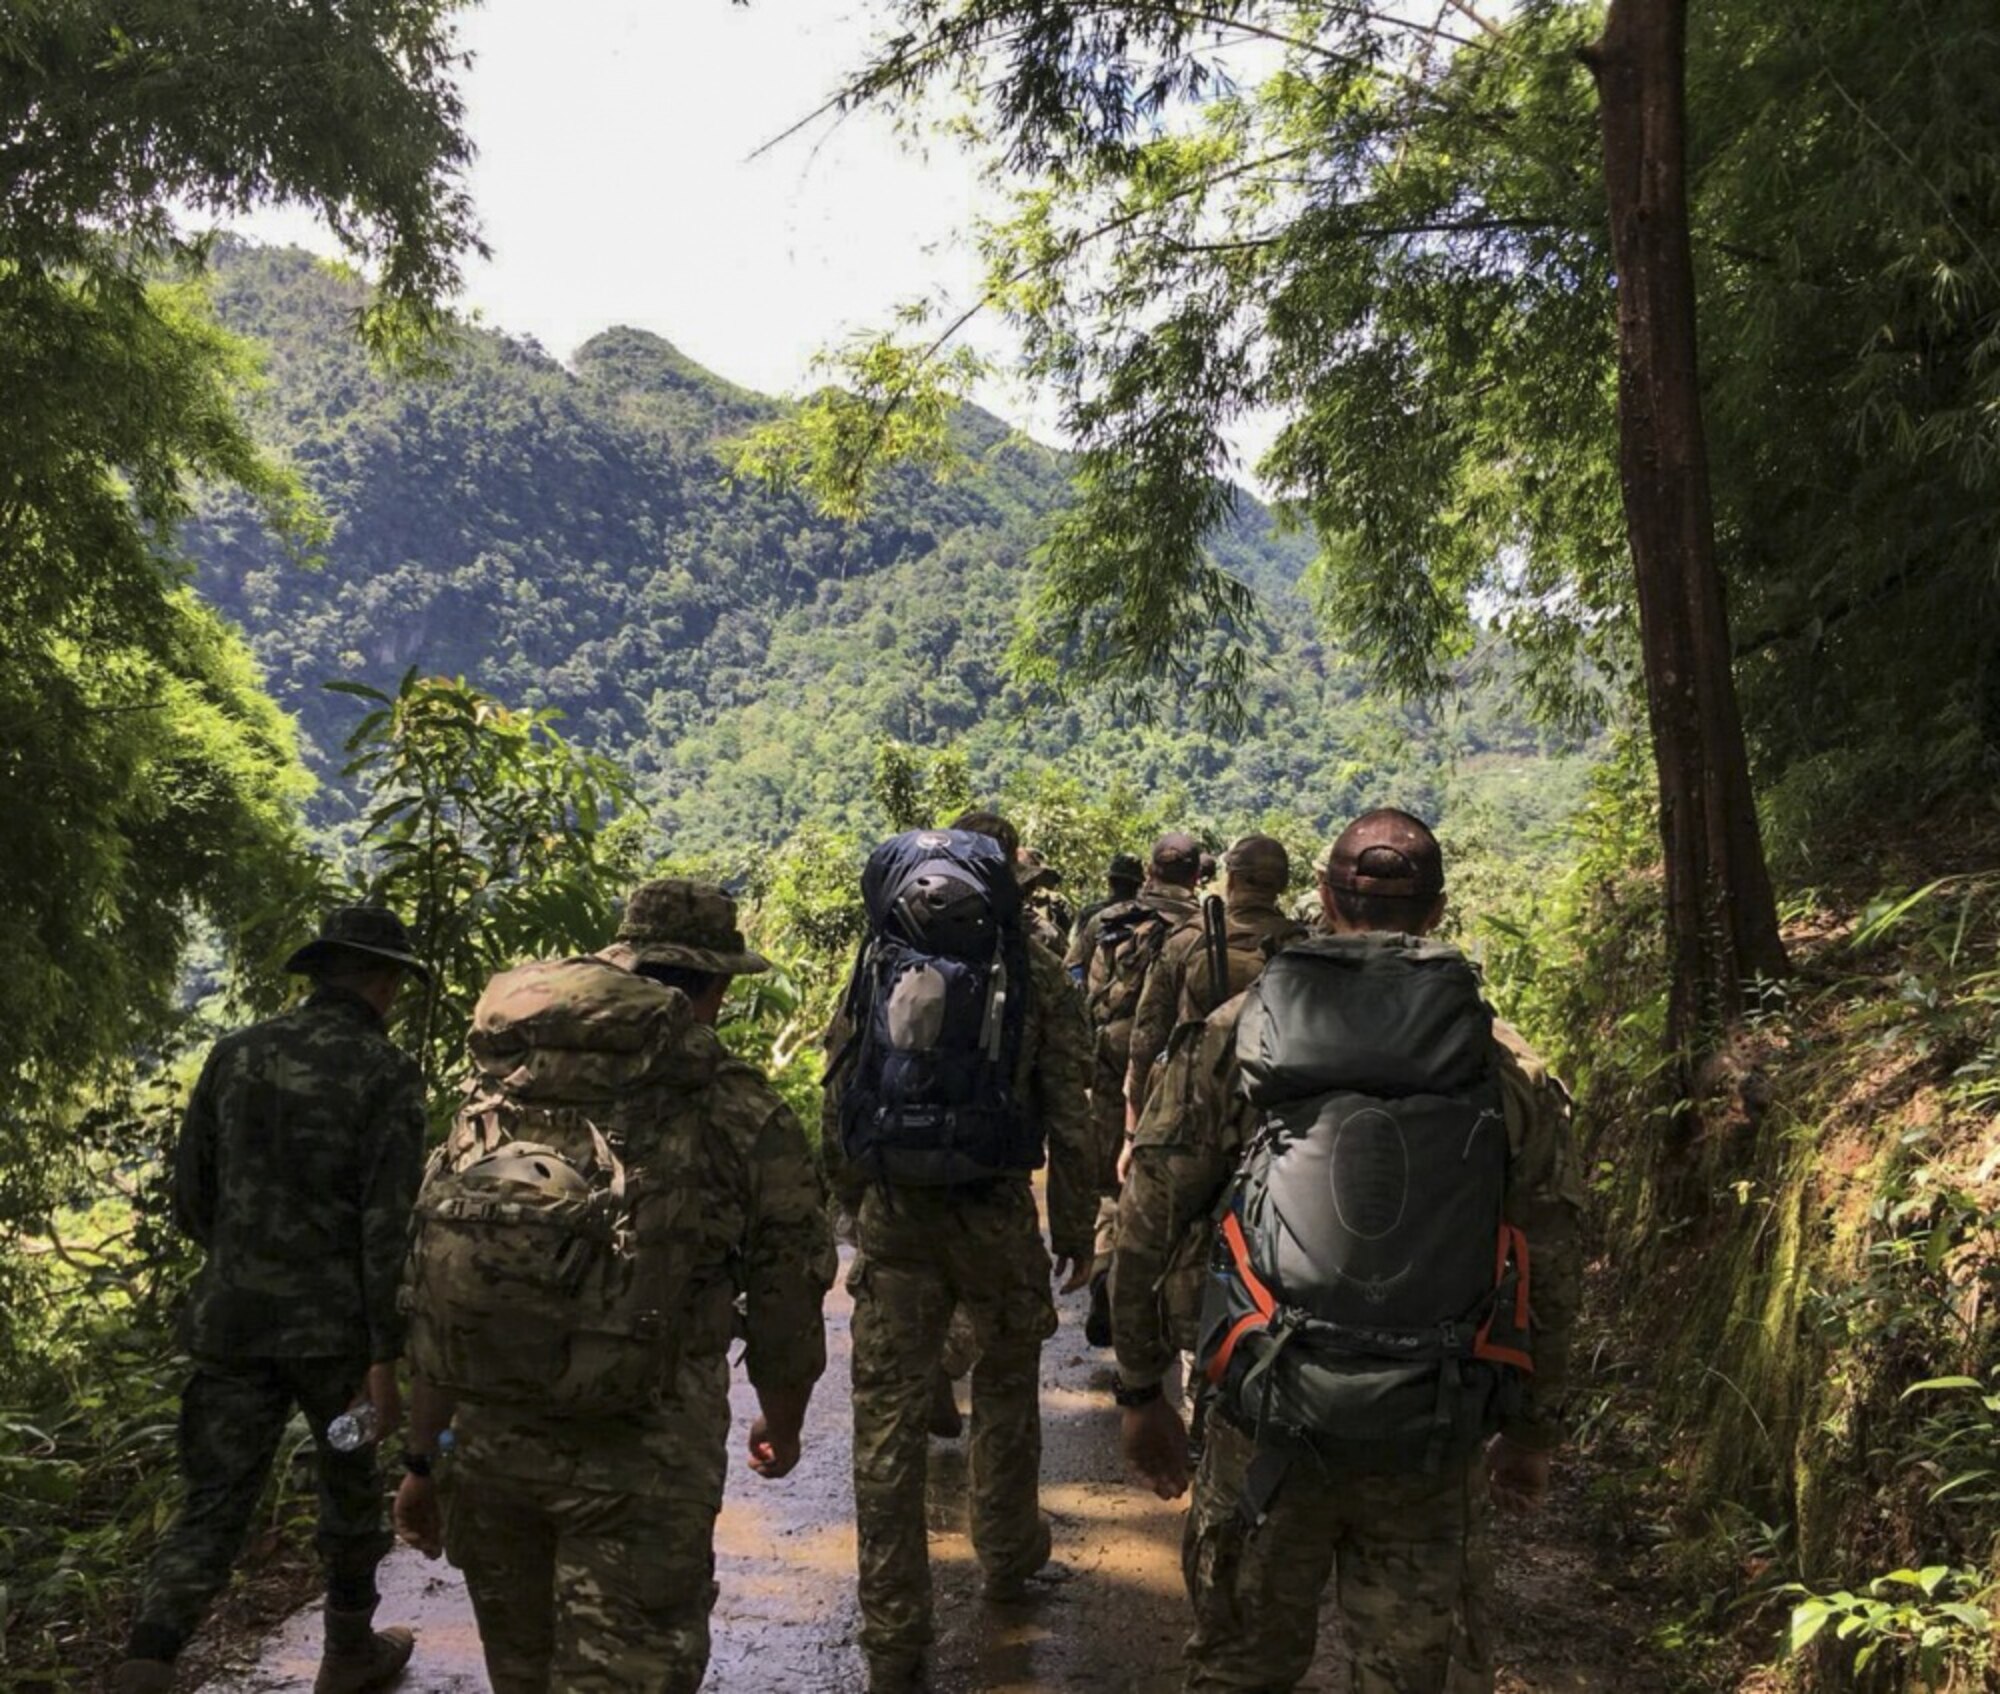 Airmen from the U.S. Indo-Pacific Command (USINDOPACOM) conduct a combined land survey with Royal Thai Army partners June 29, 2018, at Chiang Rai, Thailand. The United States, through USINDOPACOM, sent a search and rescue team to Tham Luang cave in Northern Thailand at the request of the Royal Thai government to assist in the rescue of the missing Thai soccer players and their coach. (Courtesy photo)